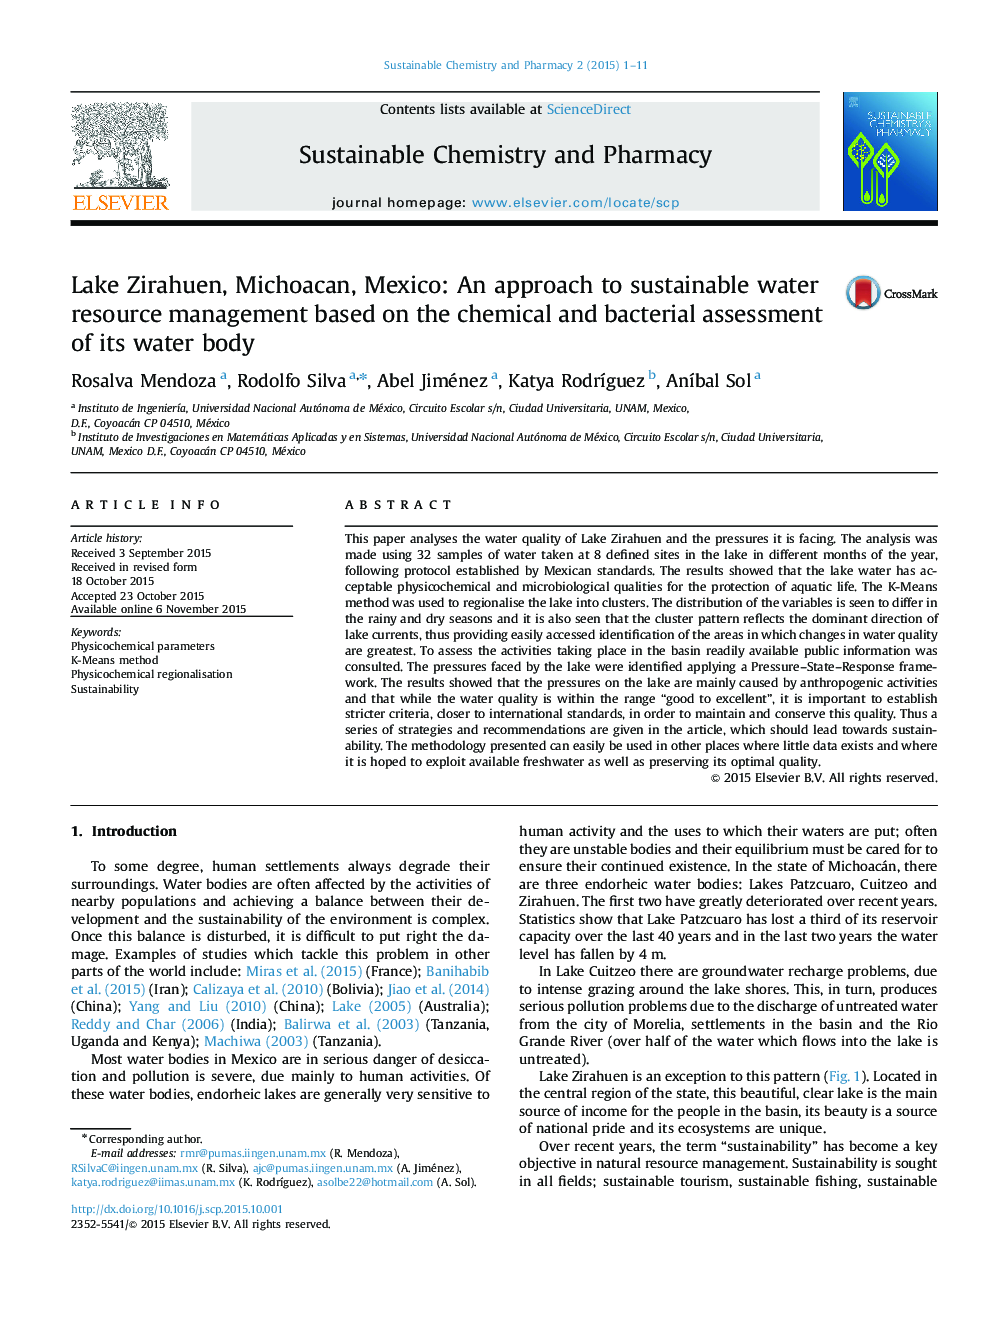 Lake Zirahuen, Michoacan, Mexico: An approach to sustainable water resource management based on the chemical and bacterial assessment of its water body